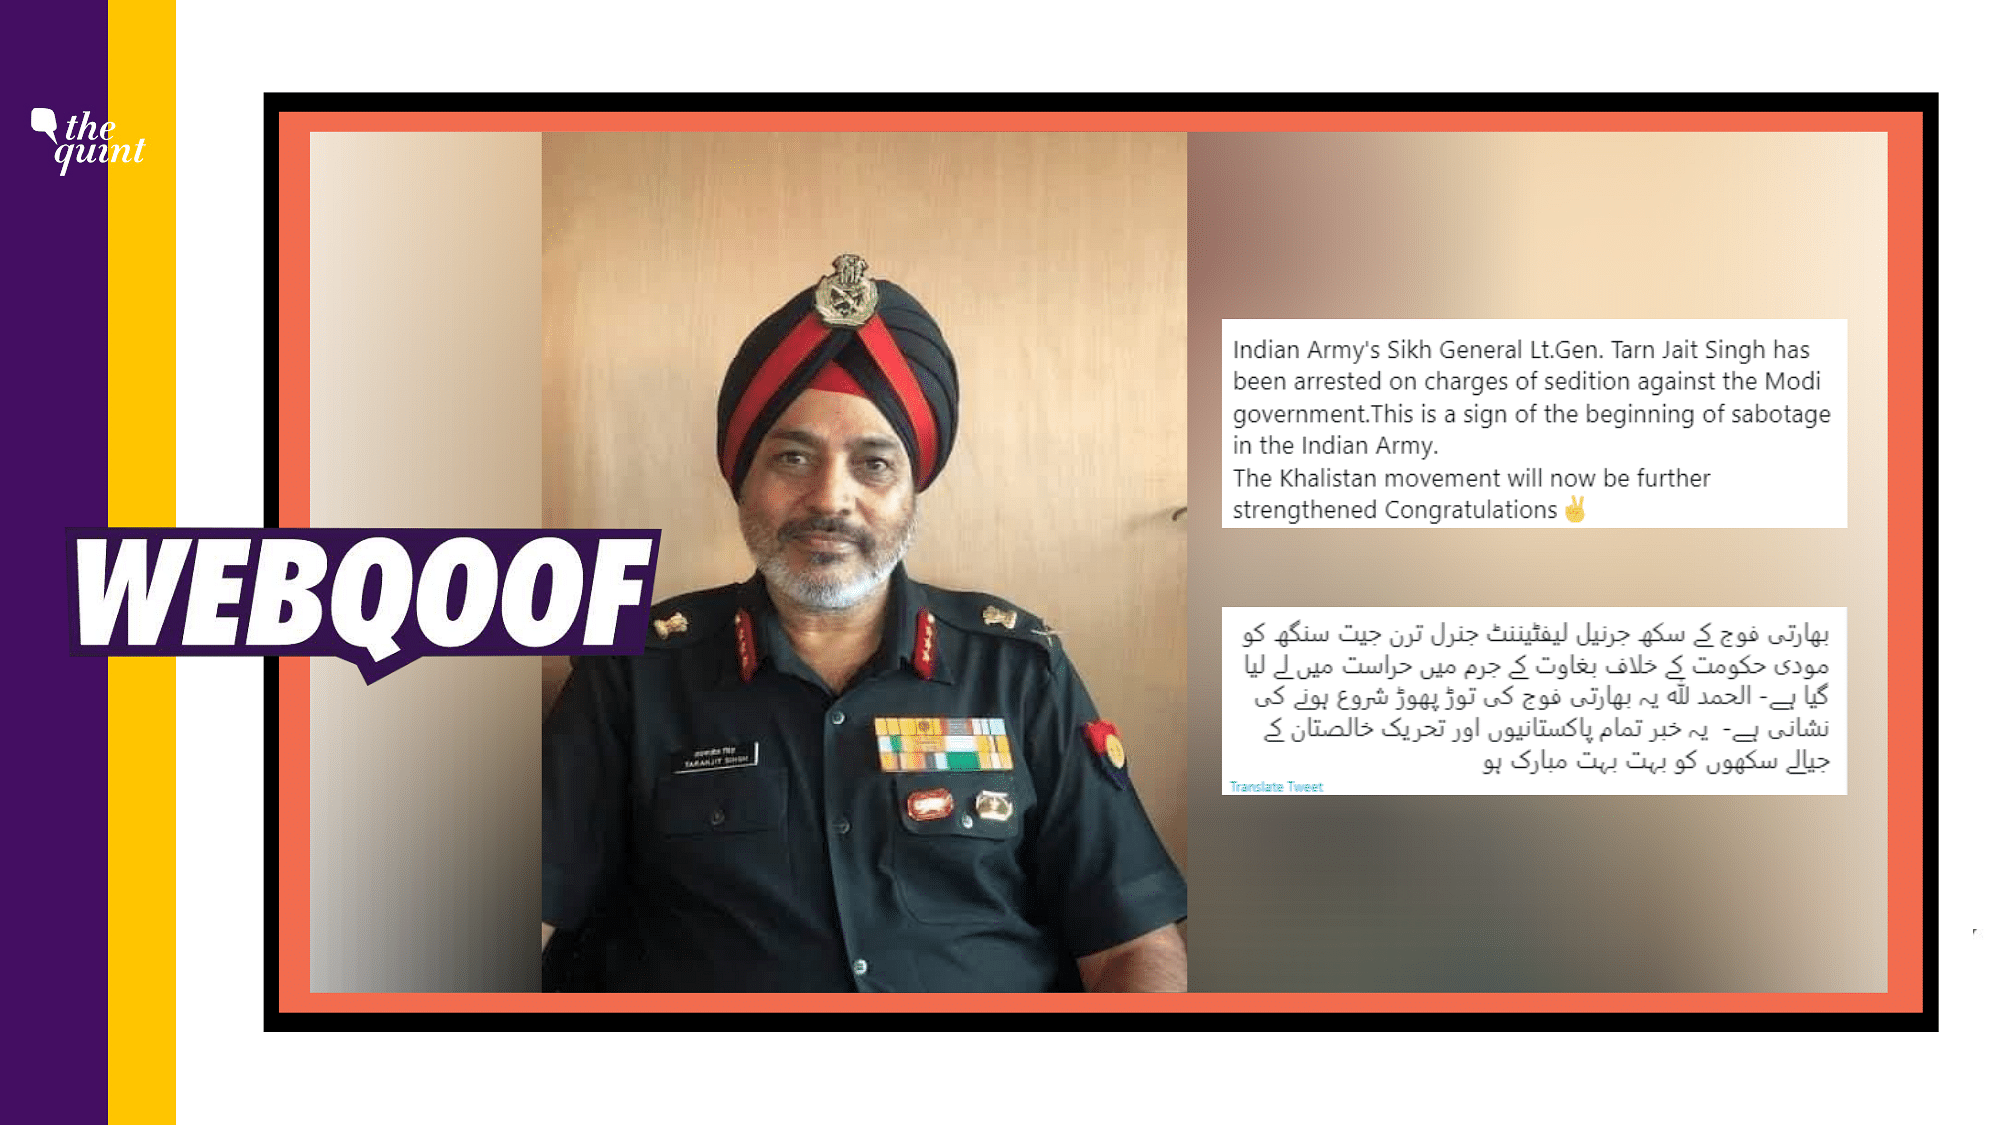 Fact-Check: In an attempt to malign Indian Army’s Lt Gen Tarnjit Singh, social media users have falsely claimed that he has been arrested on charges of sedition.